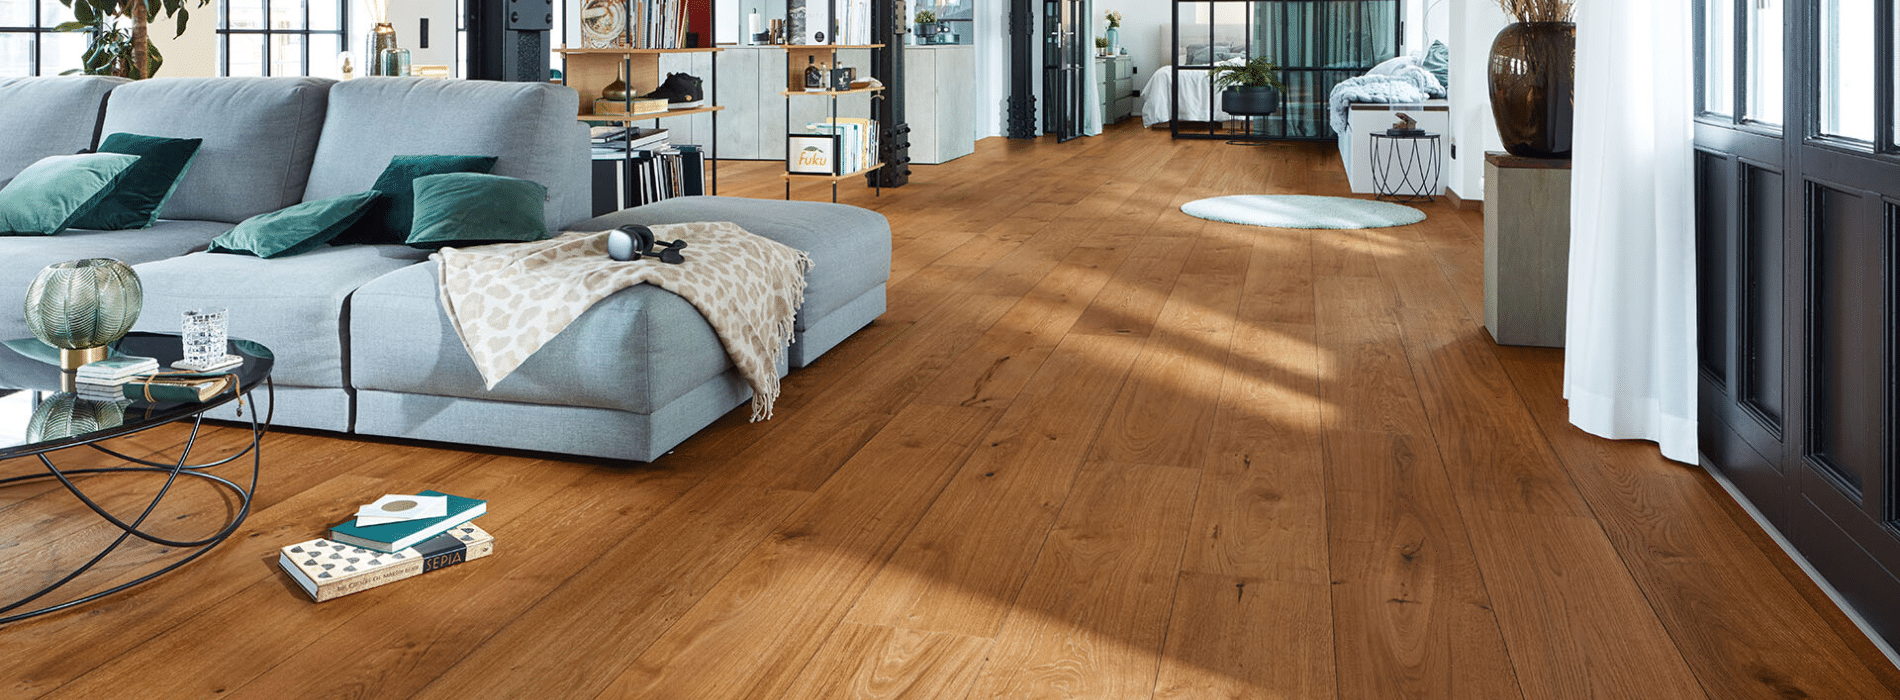 Expertly restored engineered oak floors in Havering Bower, RM4 by Mr Sander®. Marvel at the stunning transformation achieved through meticulous sanding, a mid-oak stain enhancement, and the application of four coats of Junckers Strong satin finish for long-lasting durability.